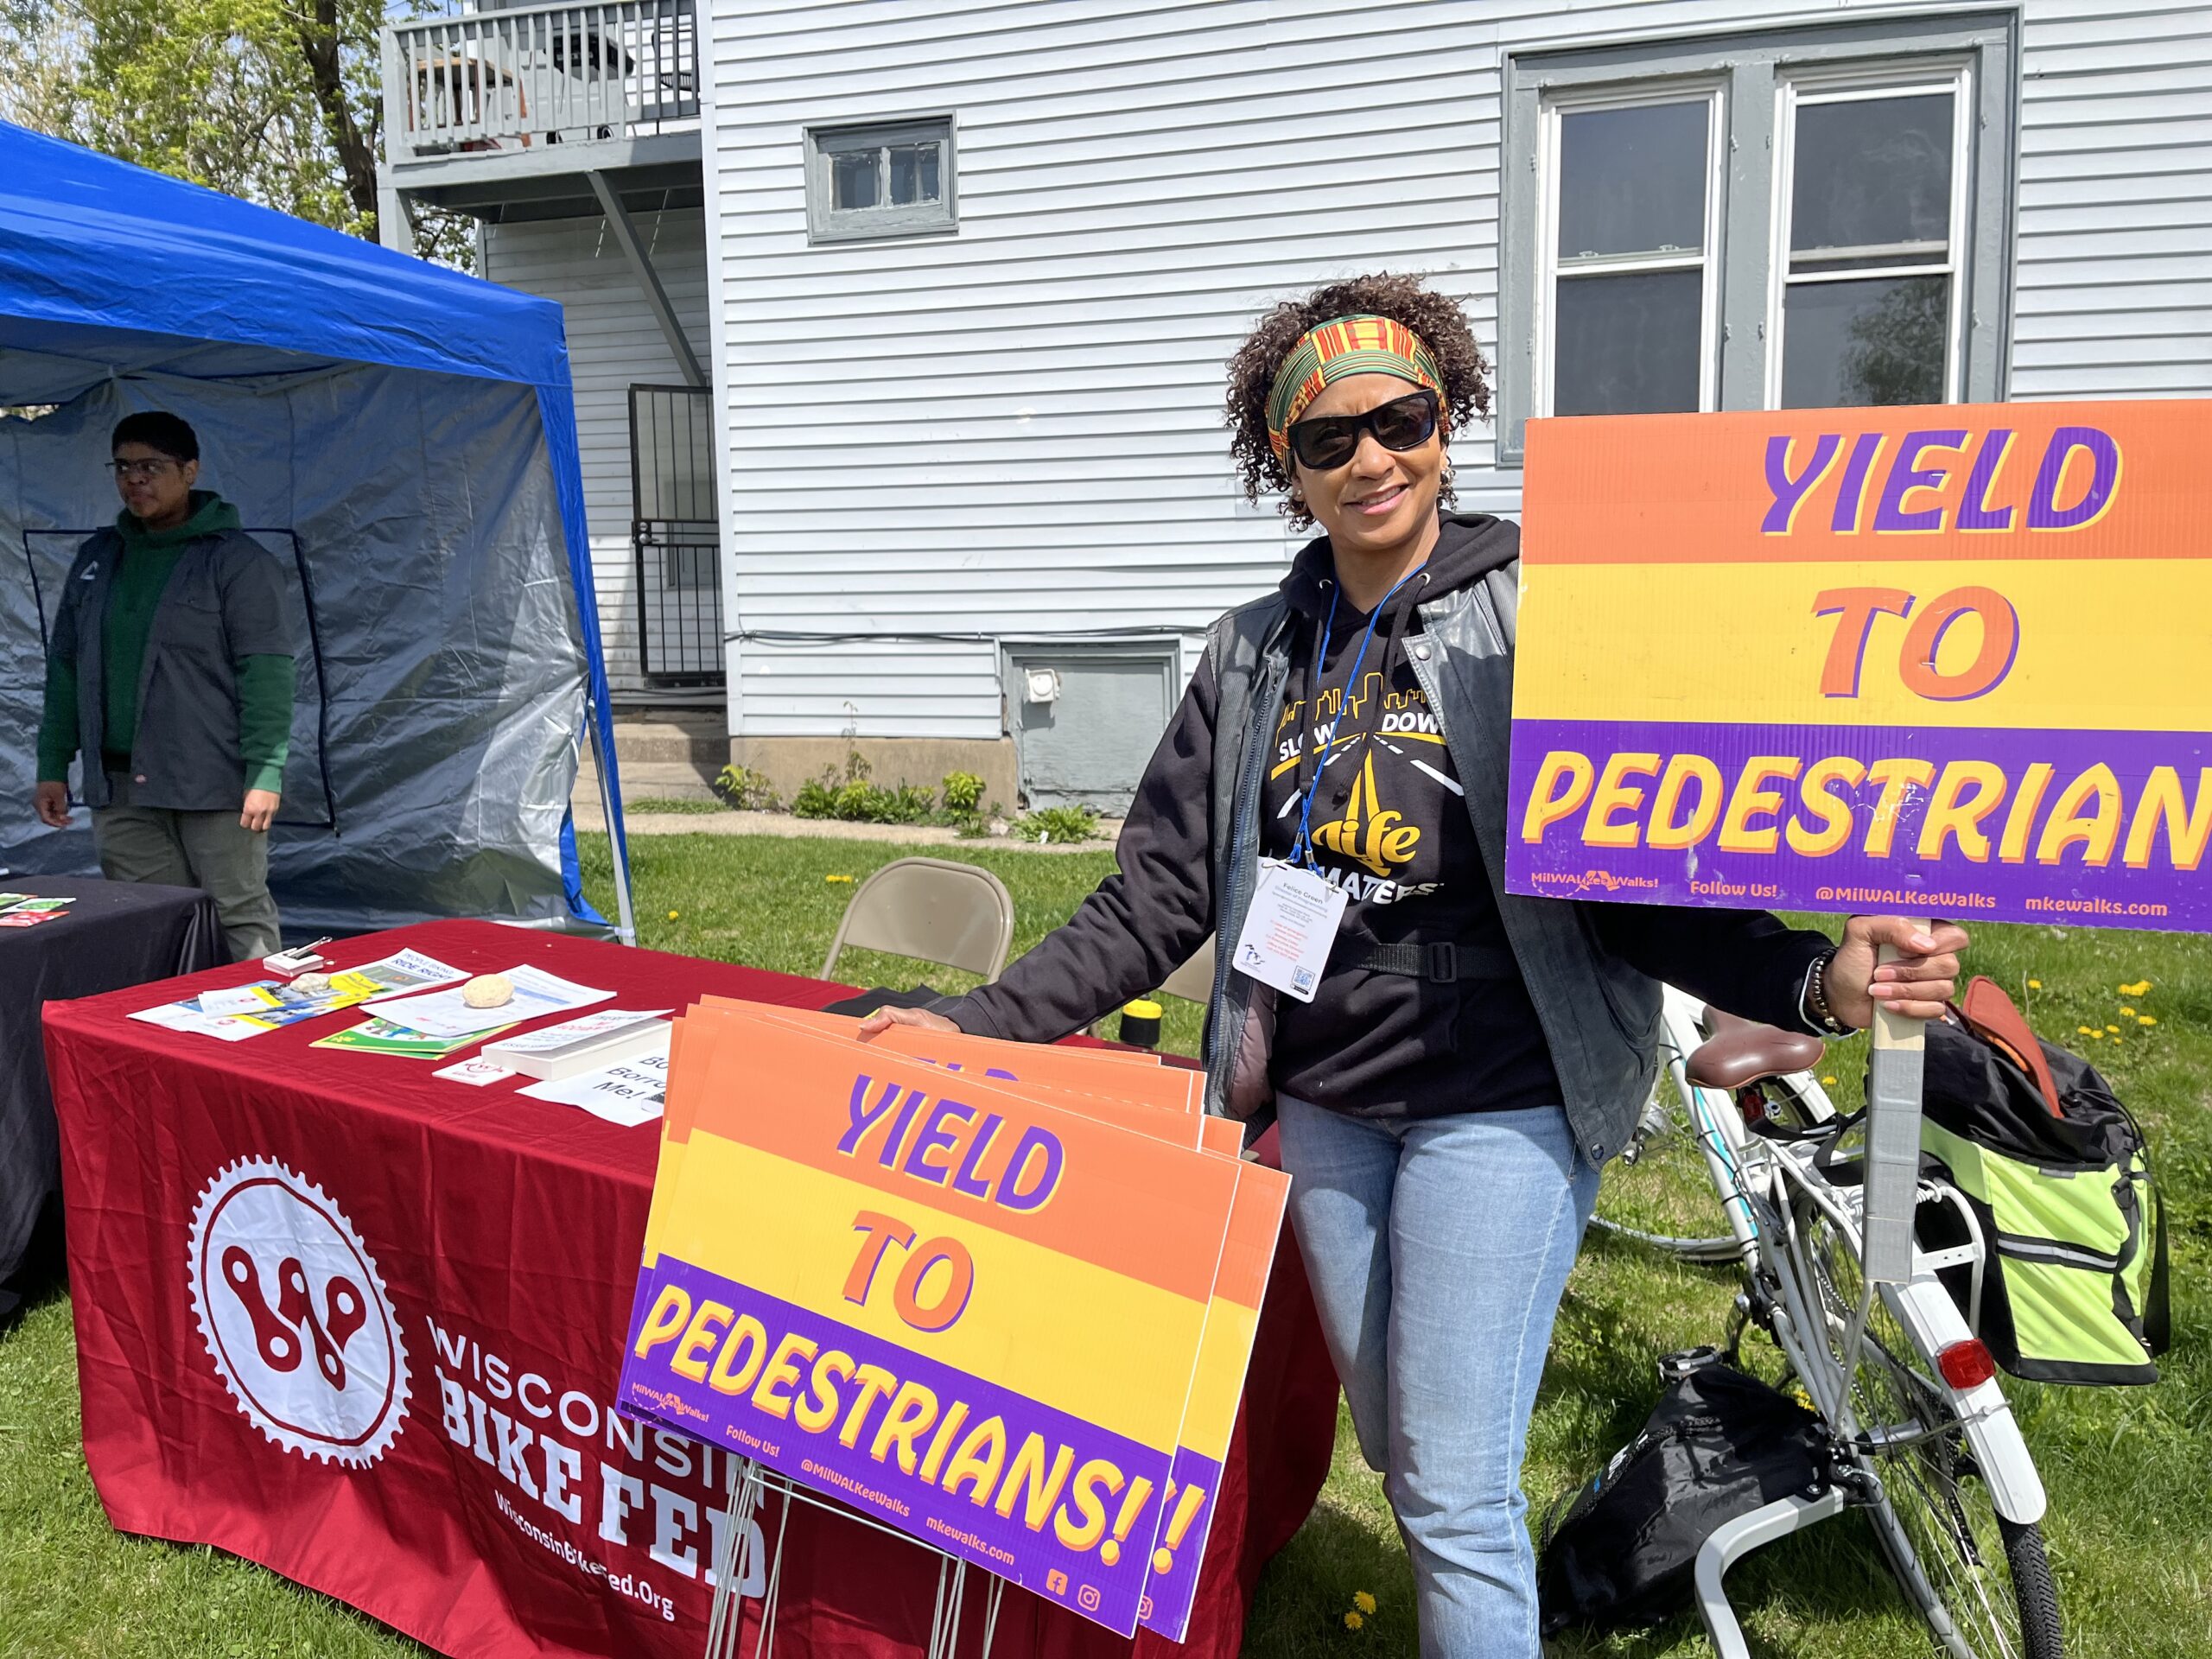 Woman holding yard signs saying "Yield to Pedestrians." There is a bike, table, and tent in the background.